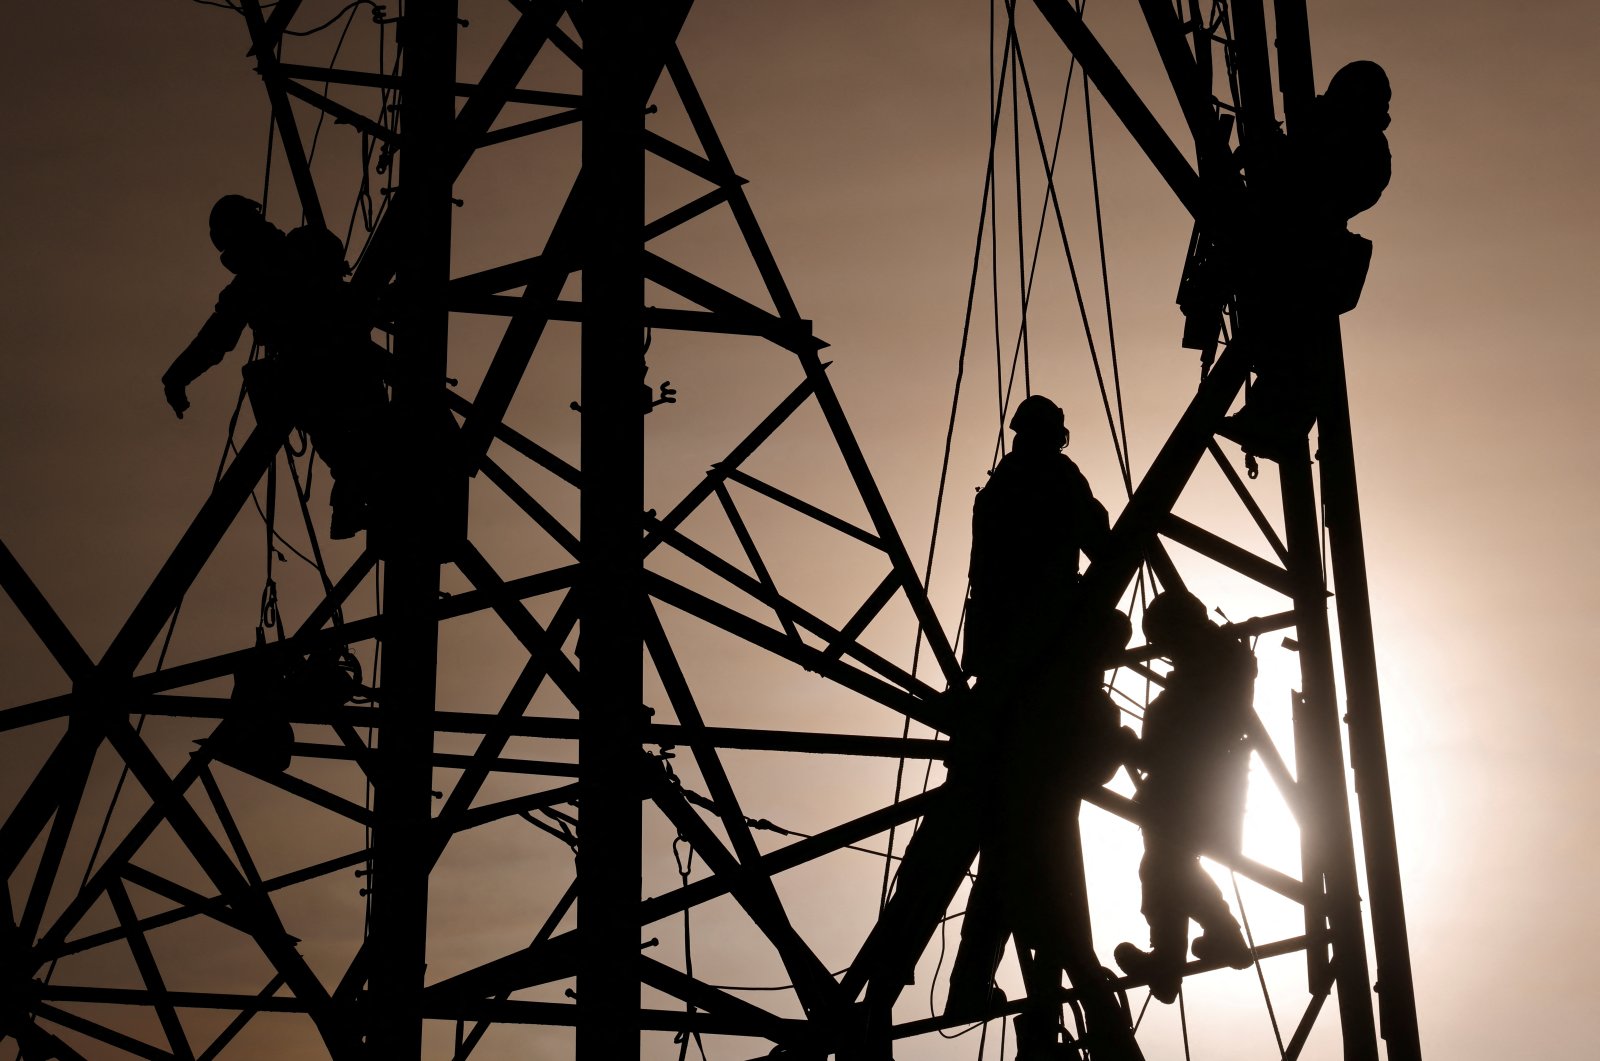 Technicians work on an electricity pylon in Bourbourg, France, Feb. 18, 2021. (Reuters File Photo)